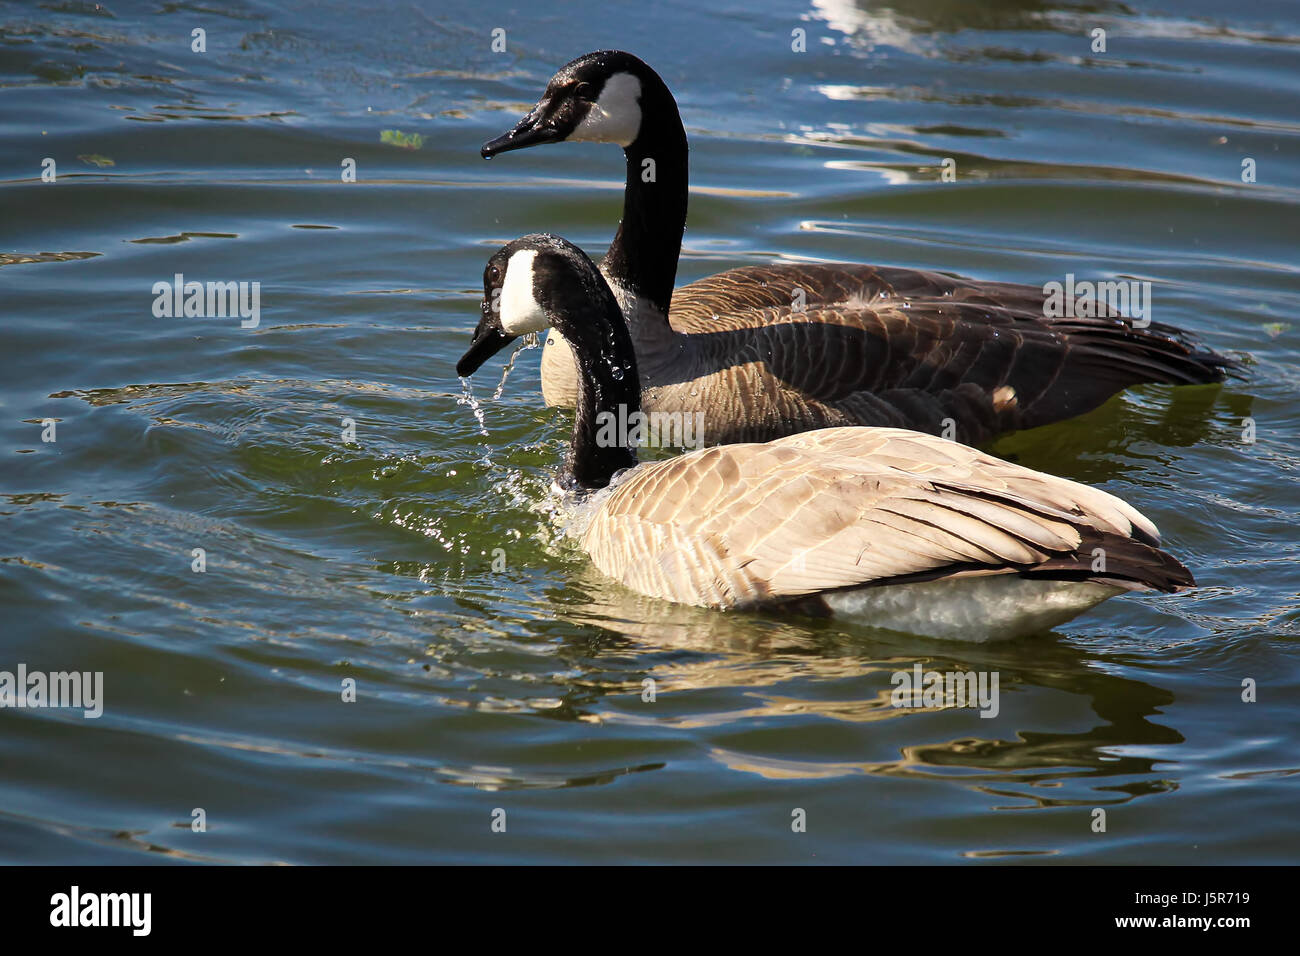 A pair of Canadian Geese washing themselves in water. Stock Photo